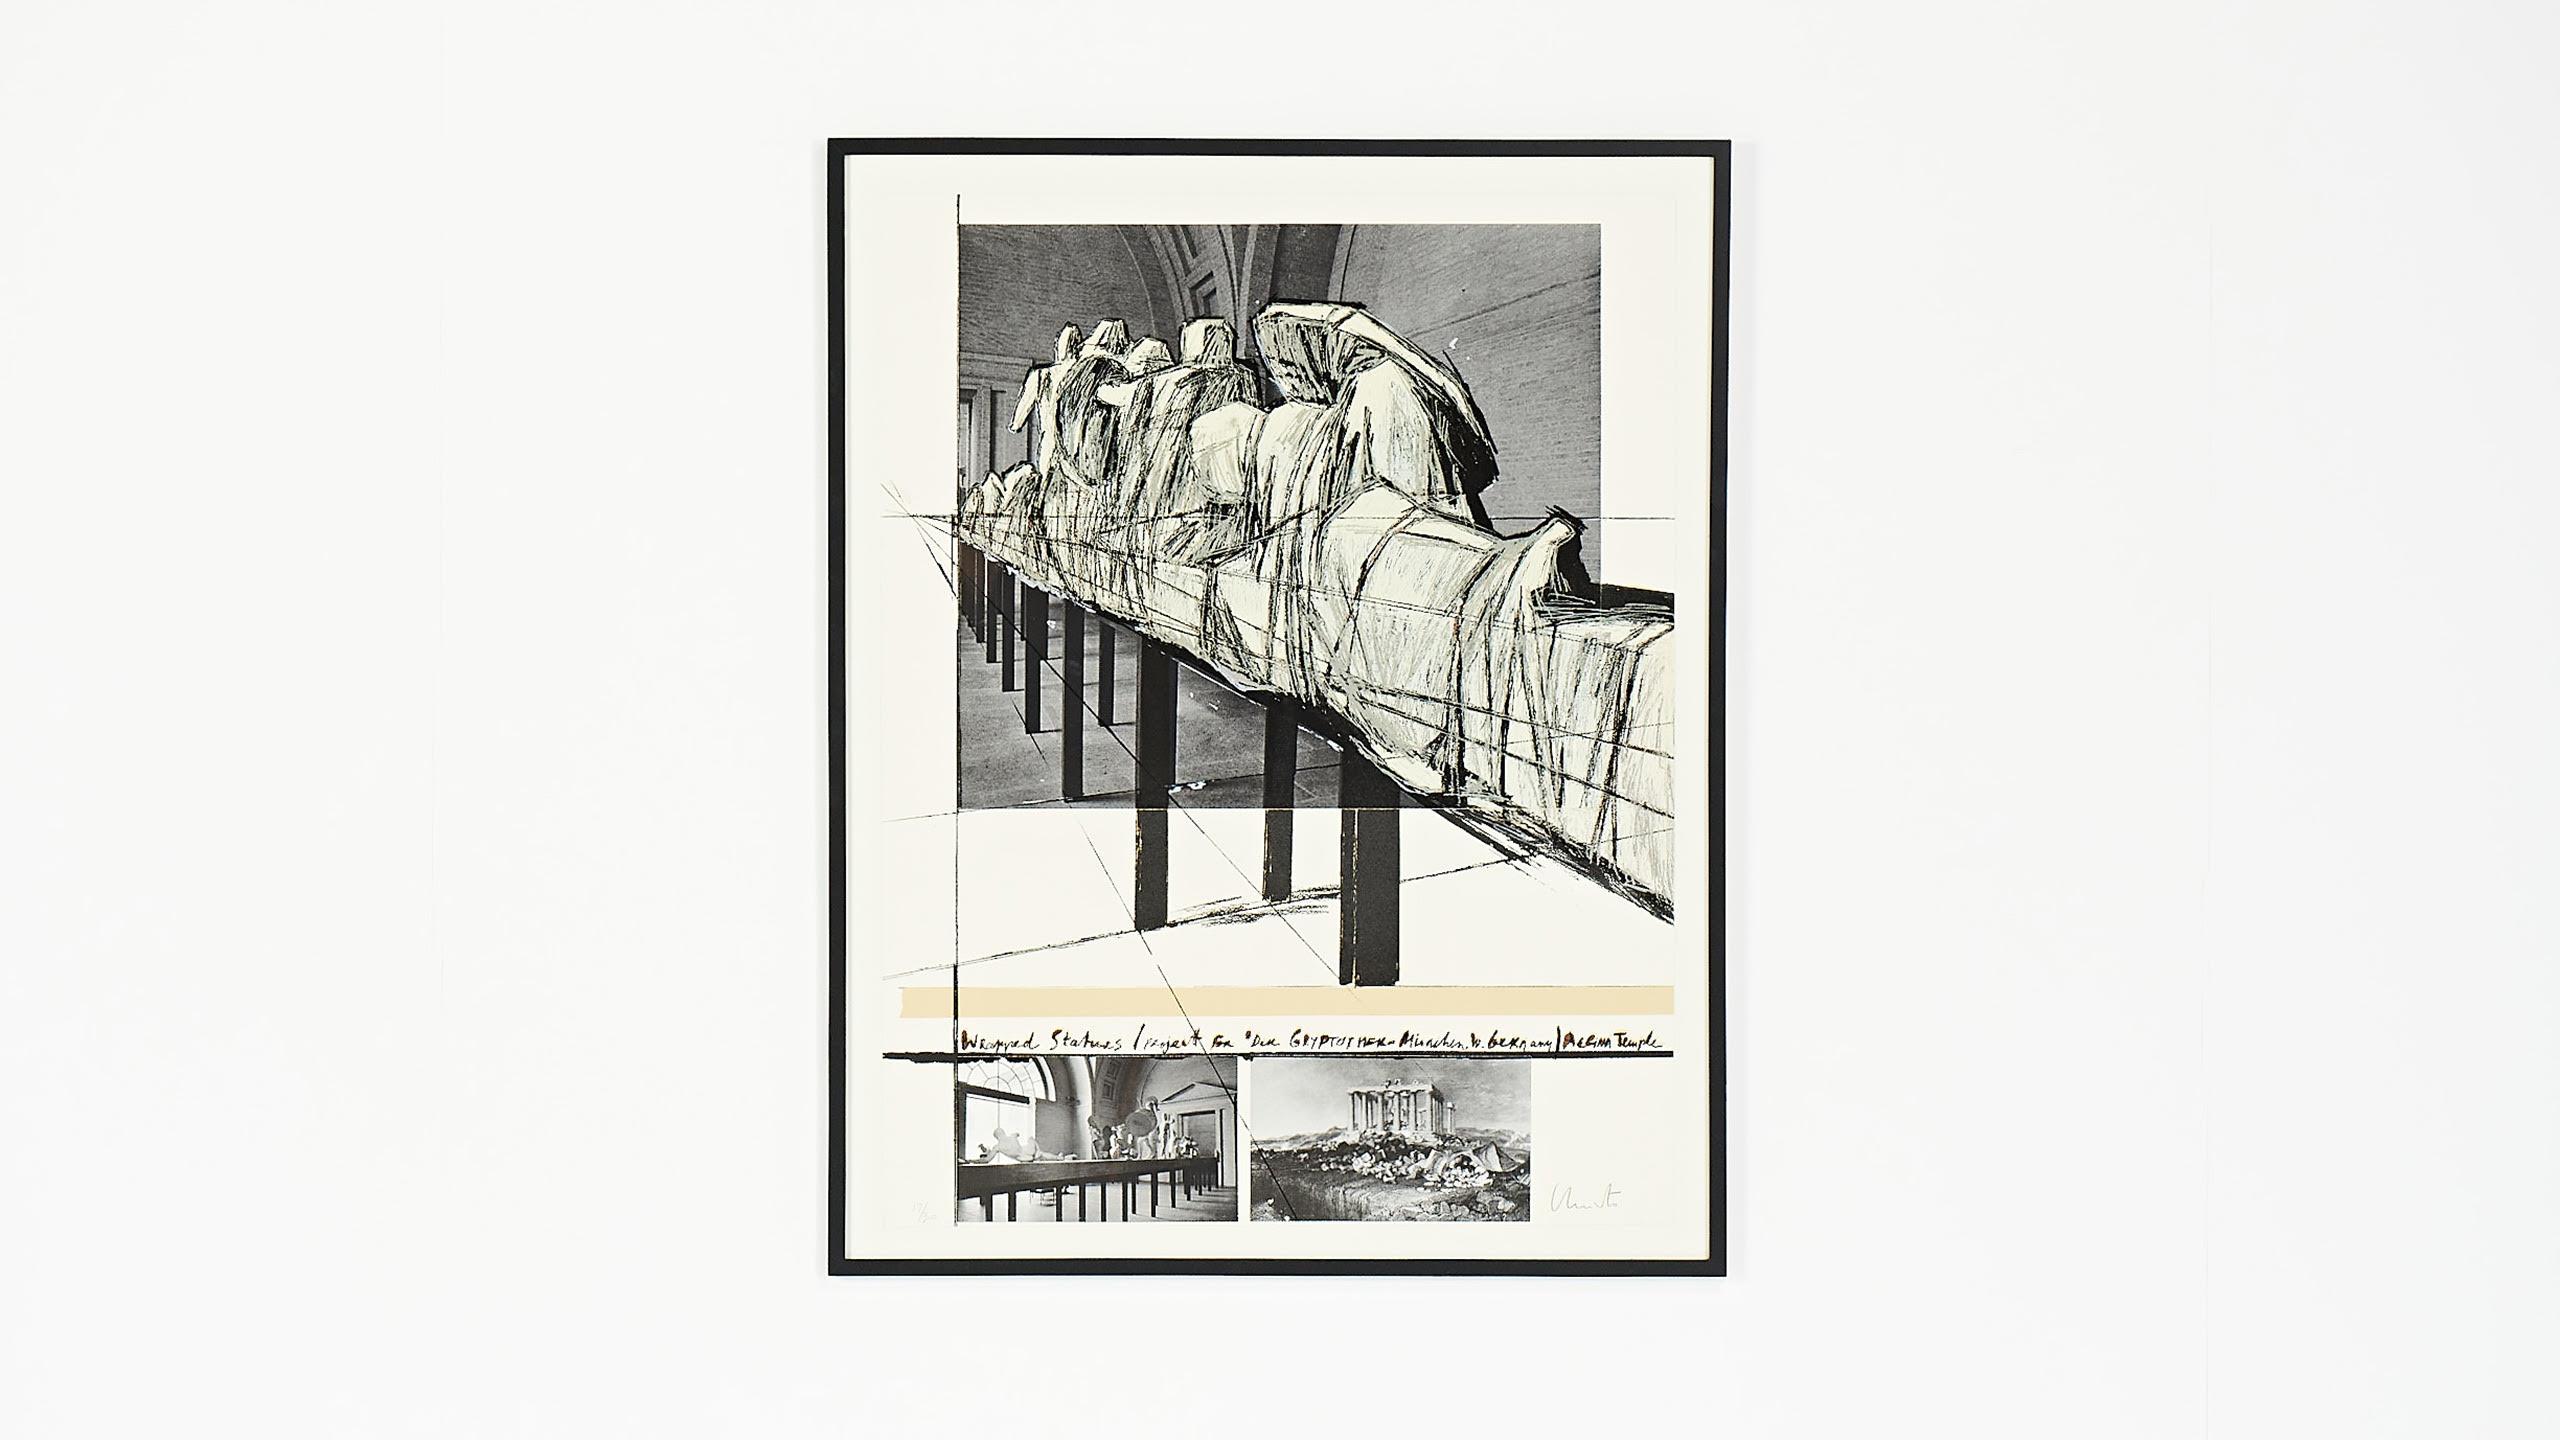 “Wrapped Statues (Project for der Glypotek Munchen, W.Germany, Aegina temple)”, a silkscreen in colors with collage of three offset prints on Arches paper, by Christo Vladimirov Javacheff and Jeanne-Claude. Signed in pencil and numbered 17/300.